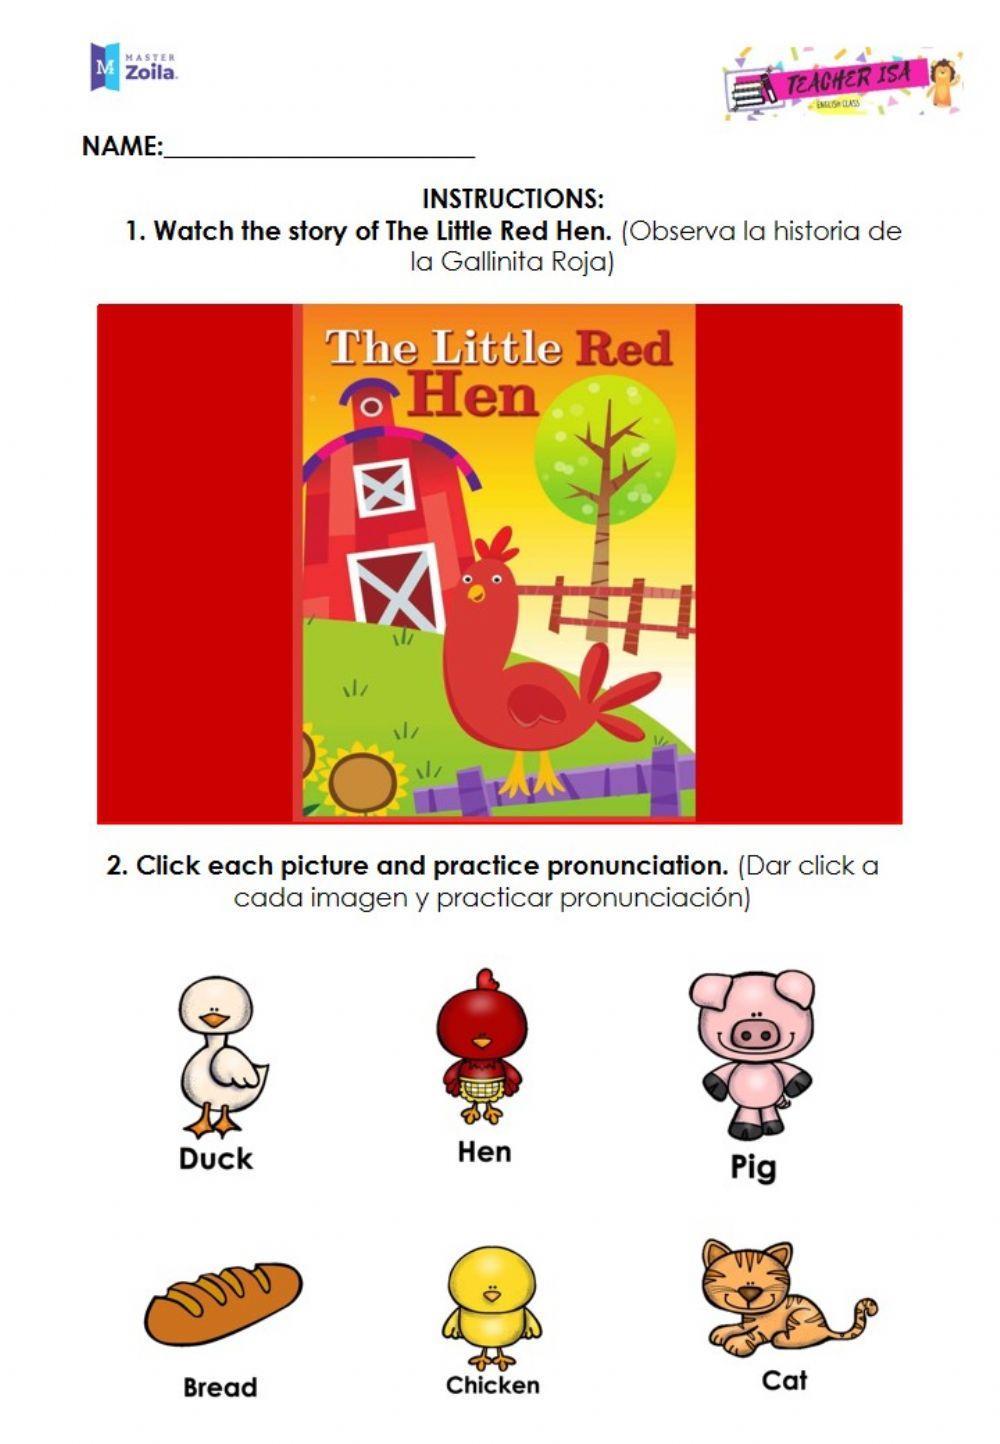 The little Red Hen